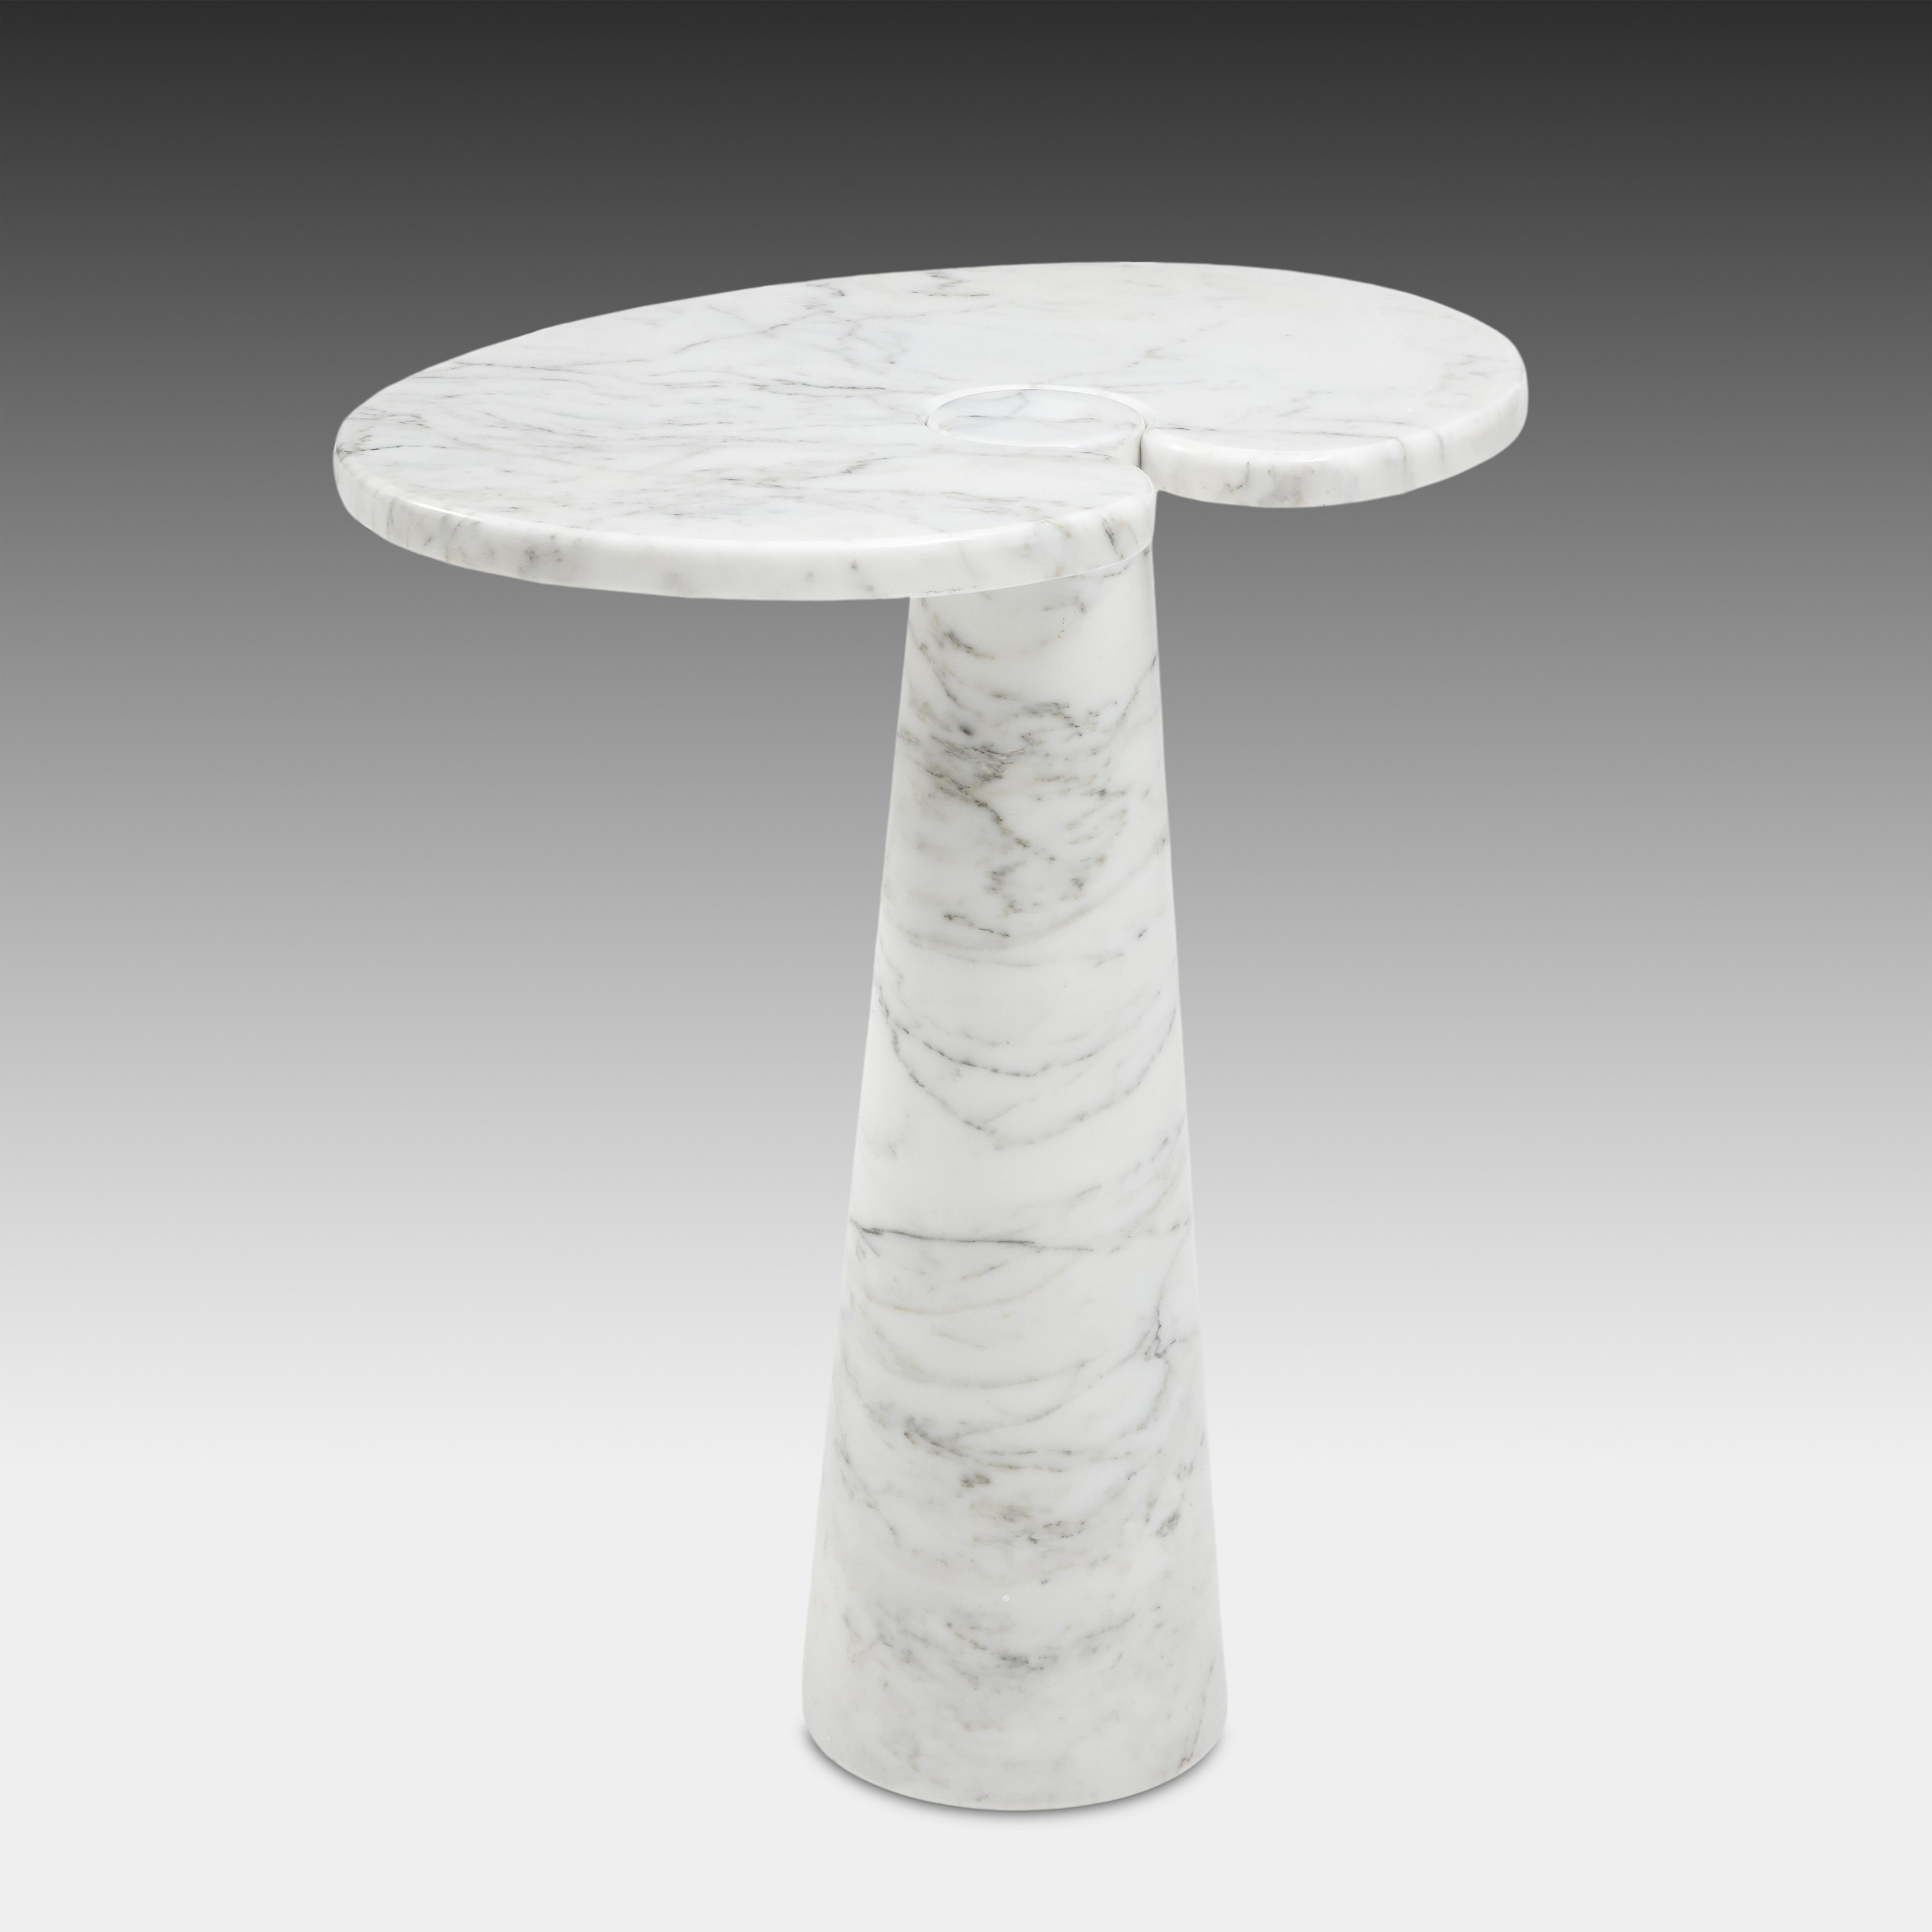 Angelo Mangiarotti Carrara Marble Tall Side Table from Eros Series, 1971 In Good Condition For Sale In New York, NY